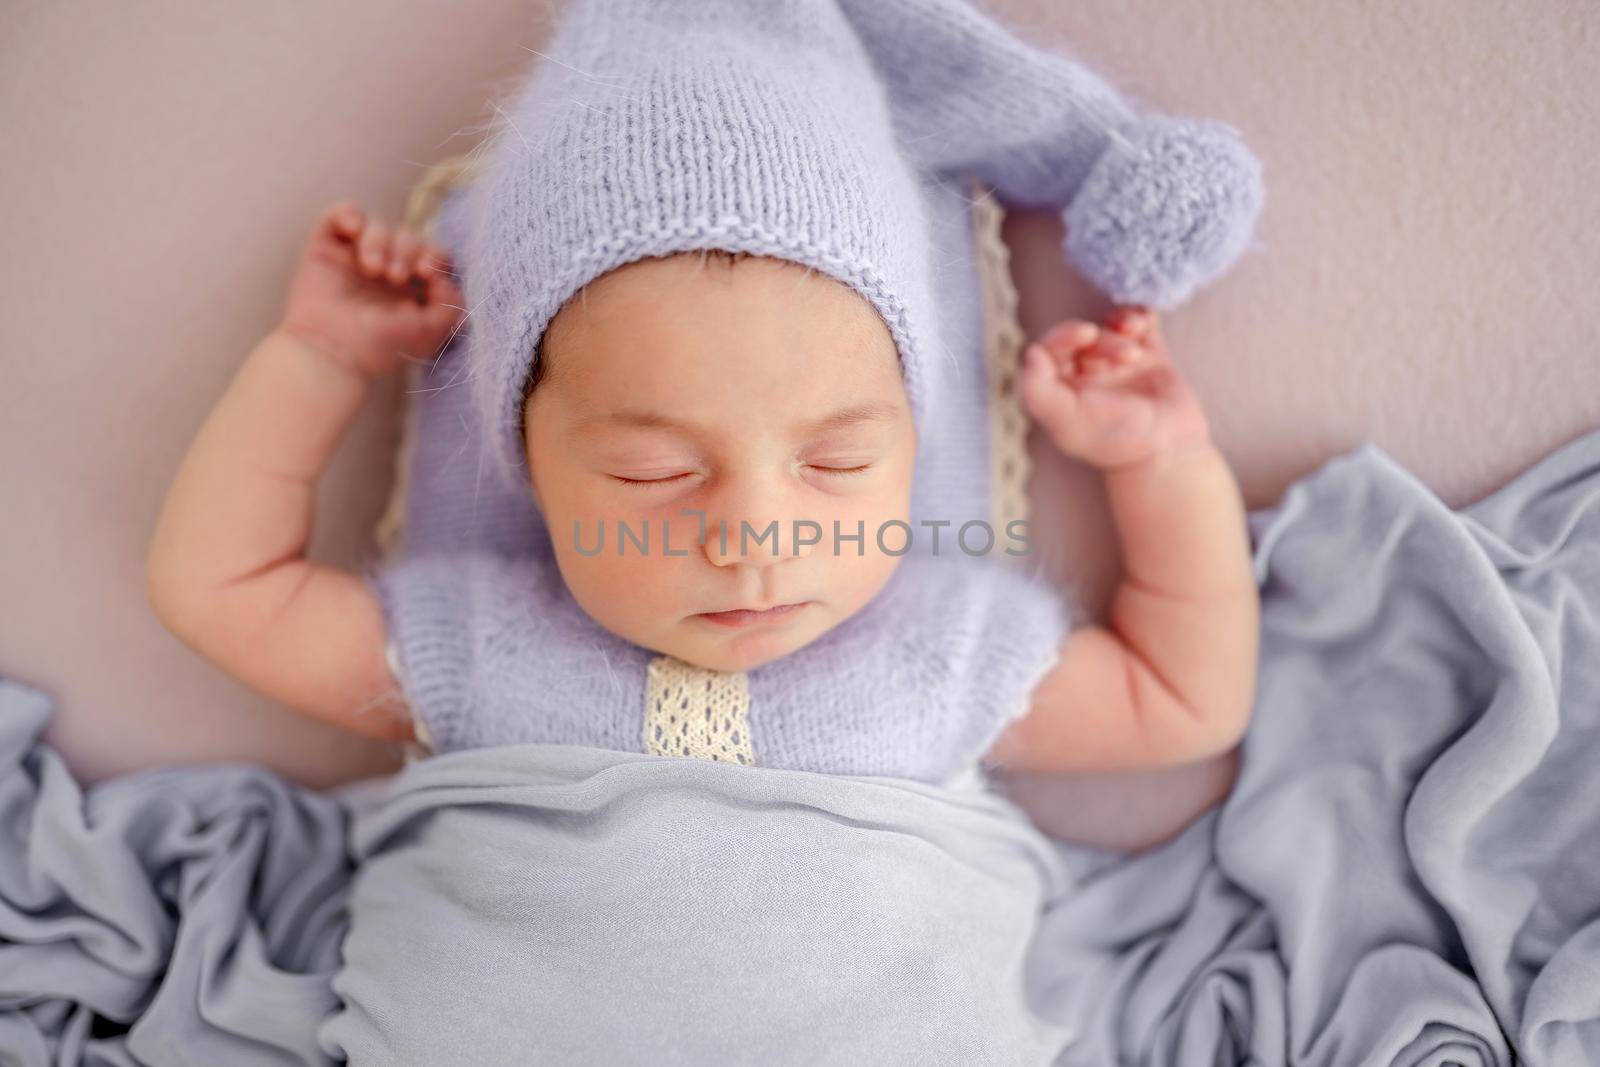 Beautiful little newborn baby girl wearing knitted costume and hat sleeping with hands up under blanket in studio. Cute infant child napping